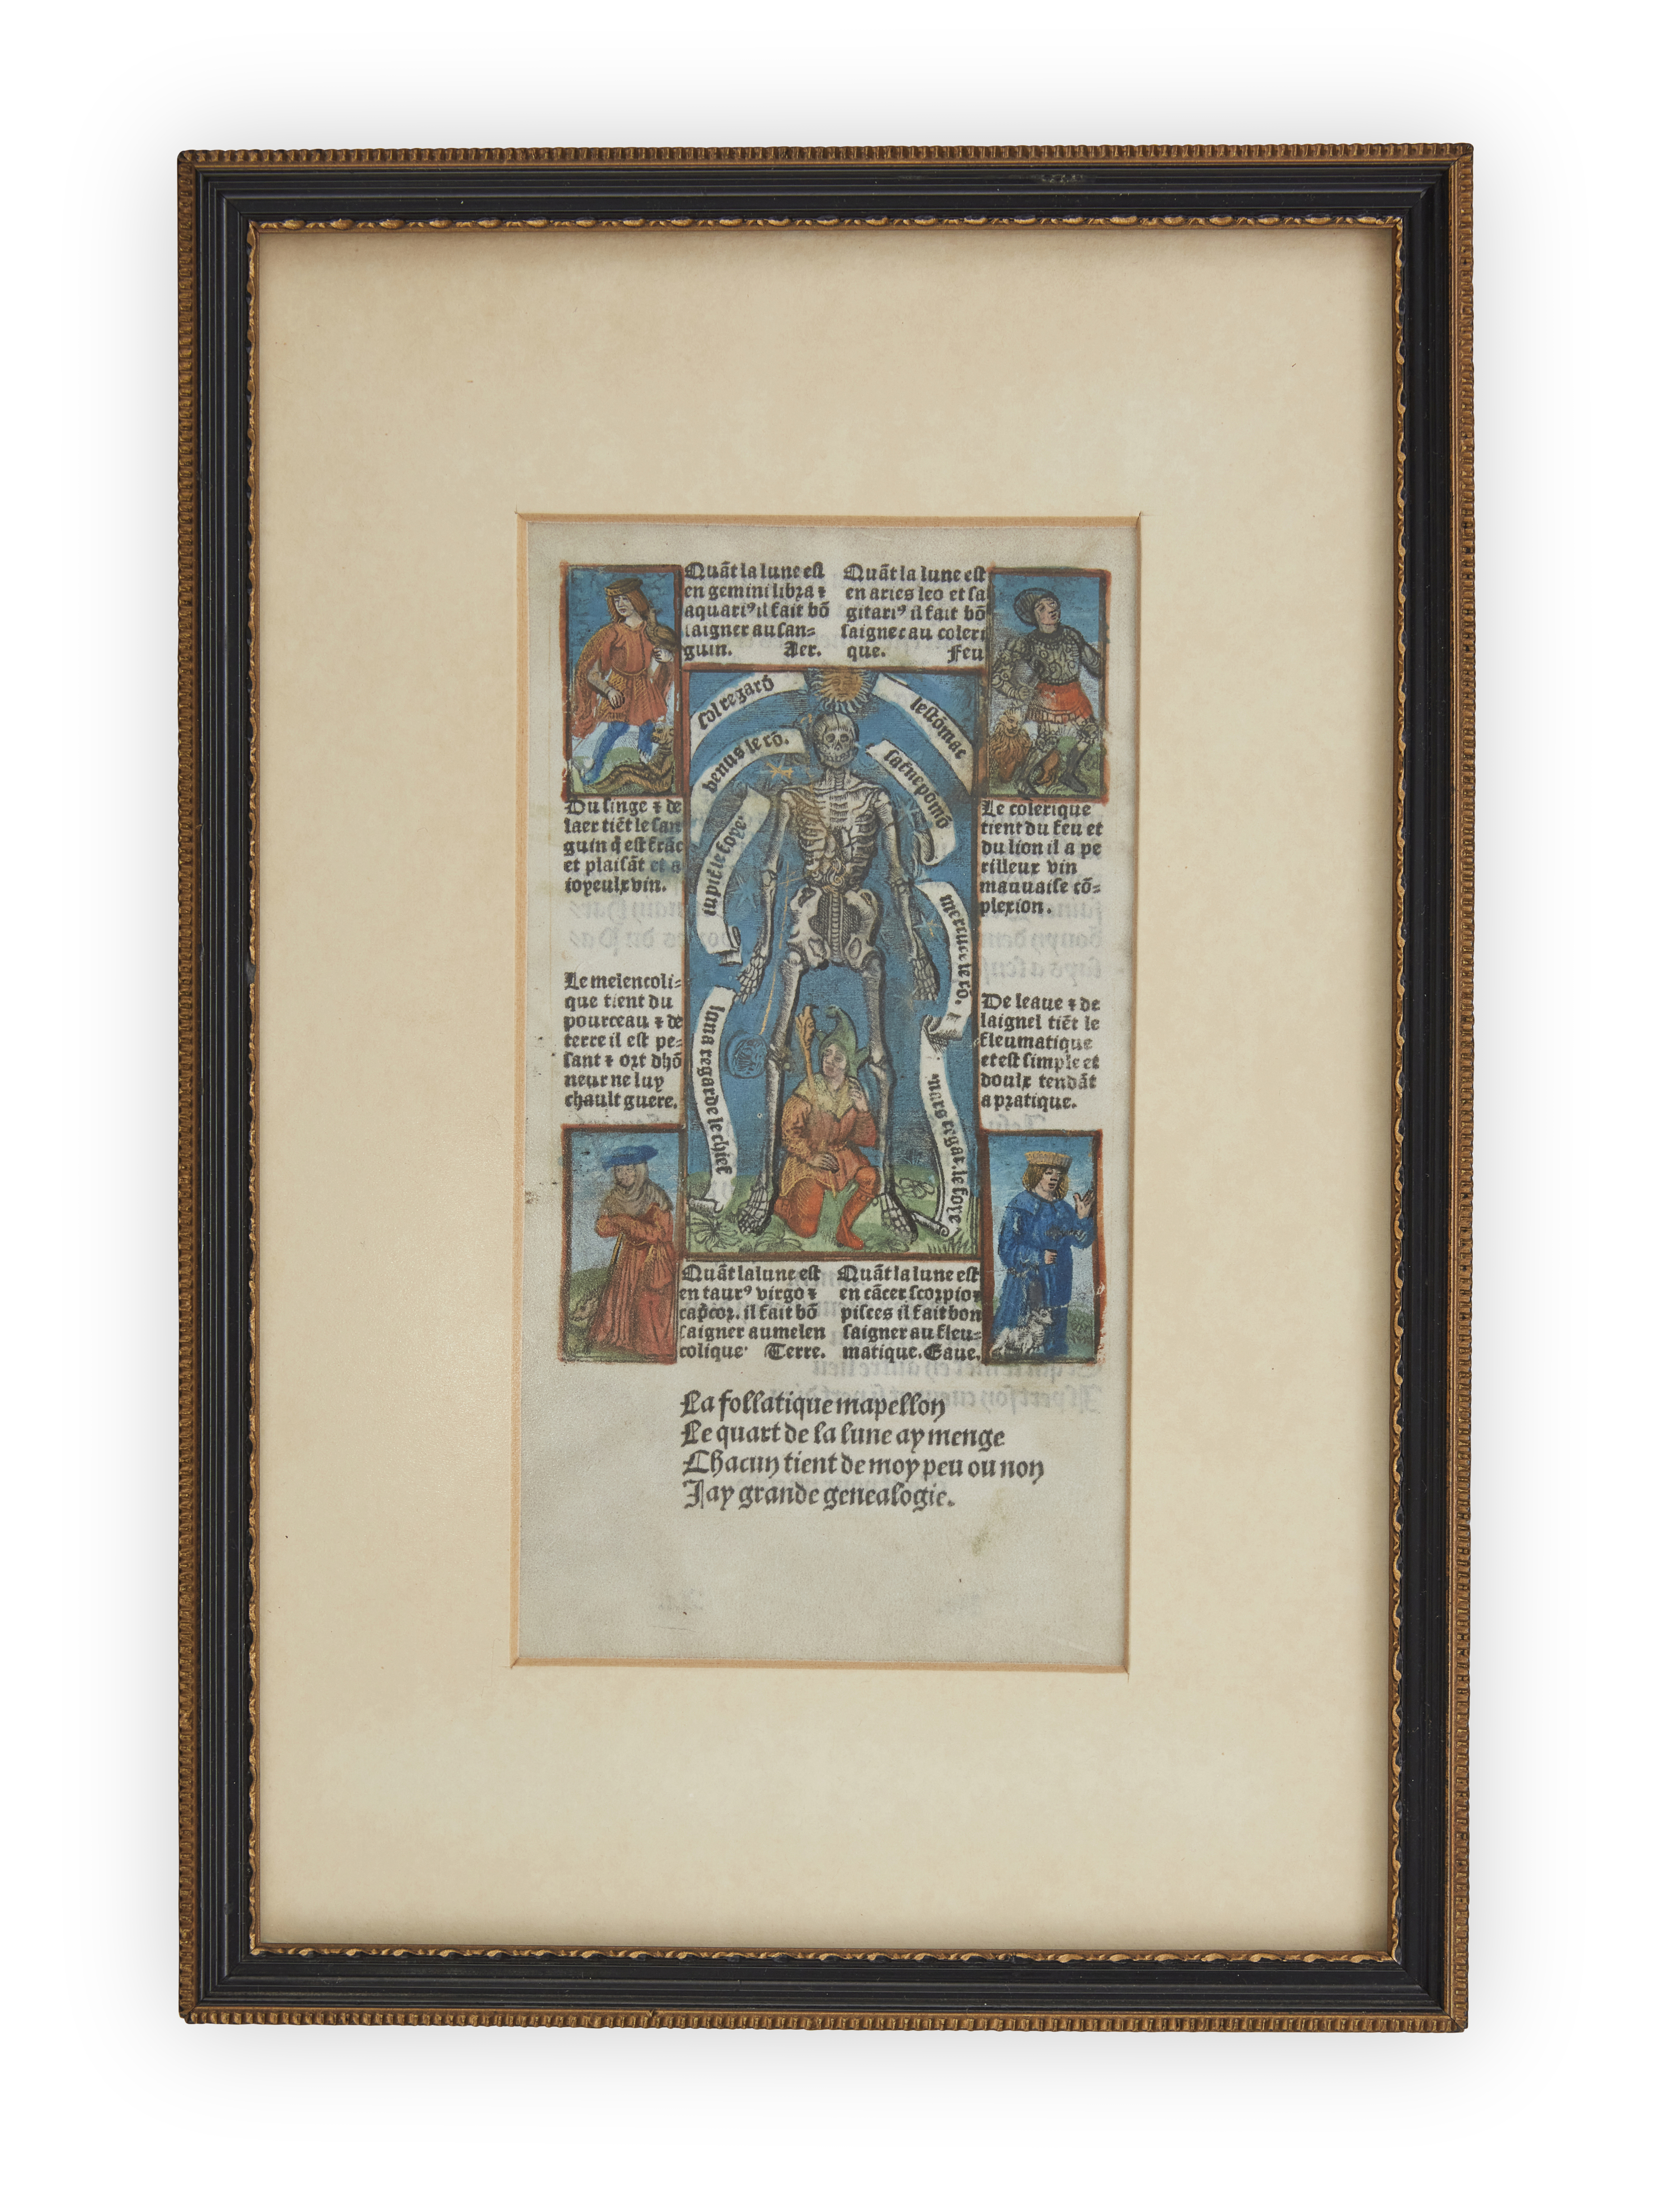 Hardouin, Germain and Gillet, Homo anatomicus or zodiac man from the Book of Hours, in French, an...